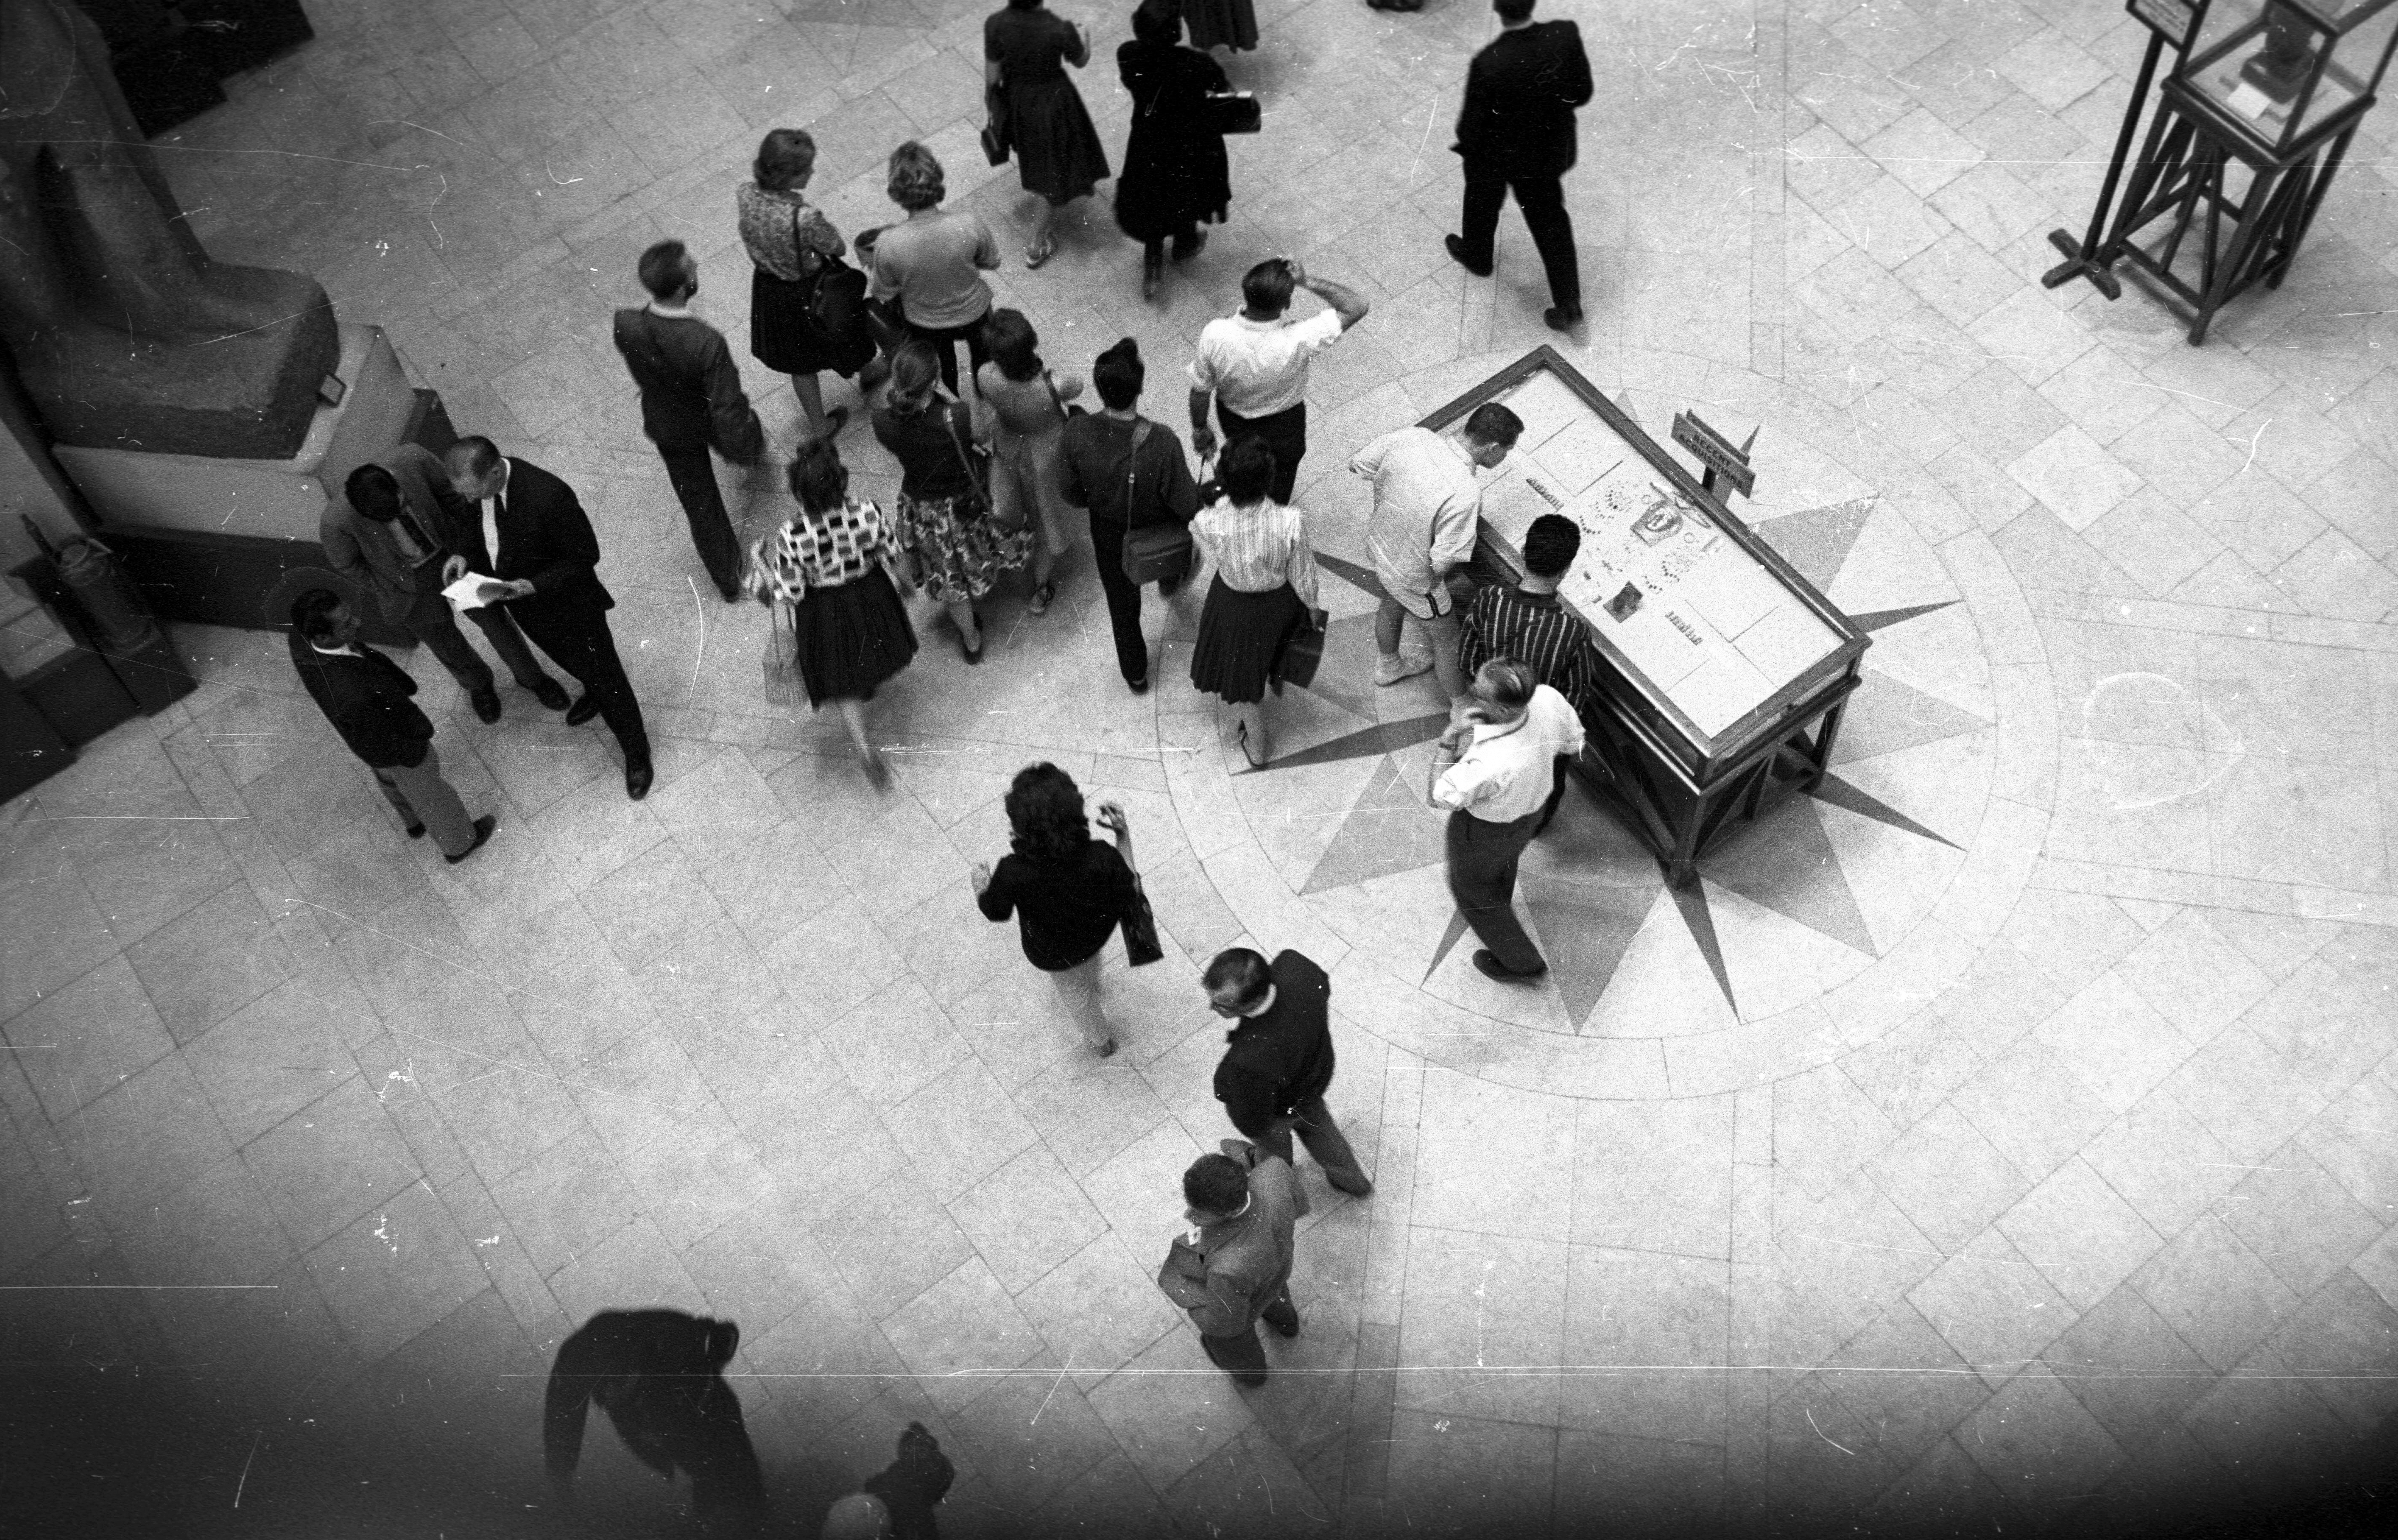 Aerial view of around 15 people walking through an exhibition, two are looking at a display table in the middle of the room